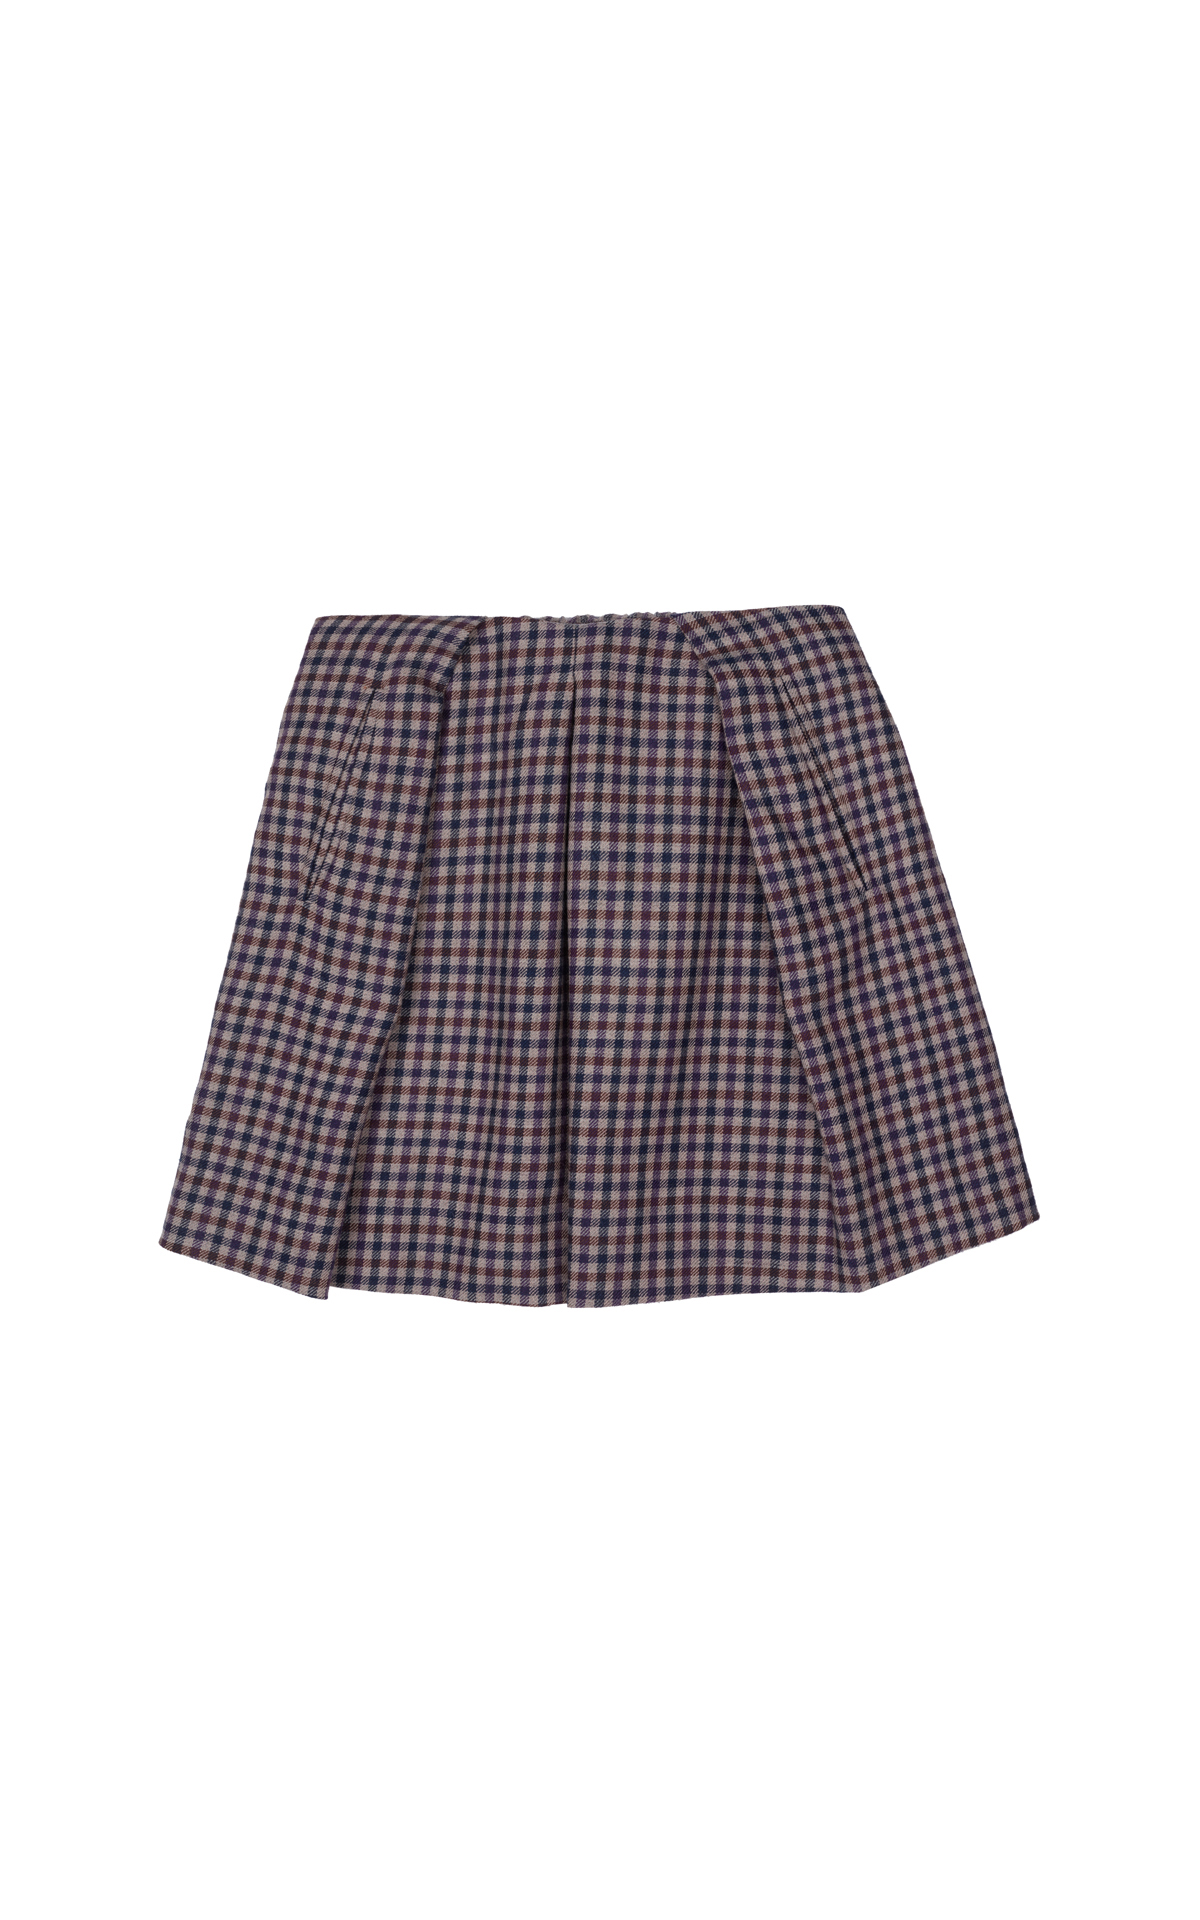 Bonpoint Grey check skirt from Bicester Village